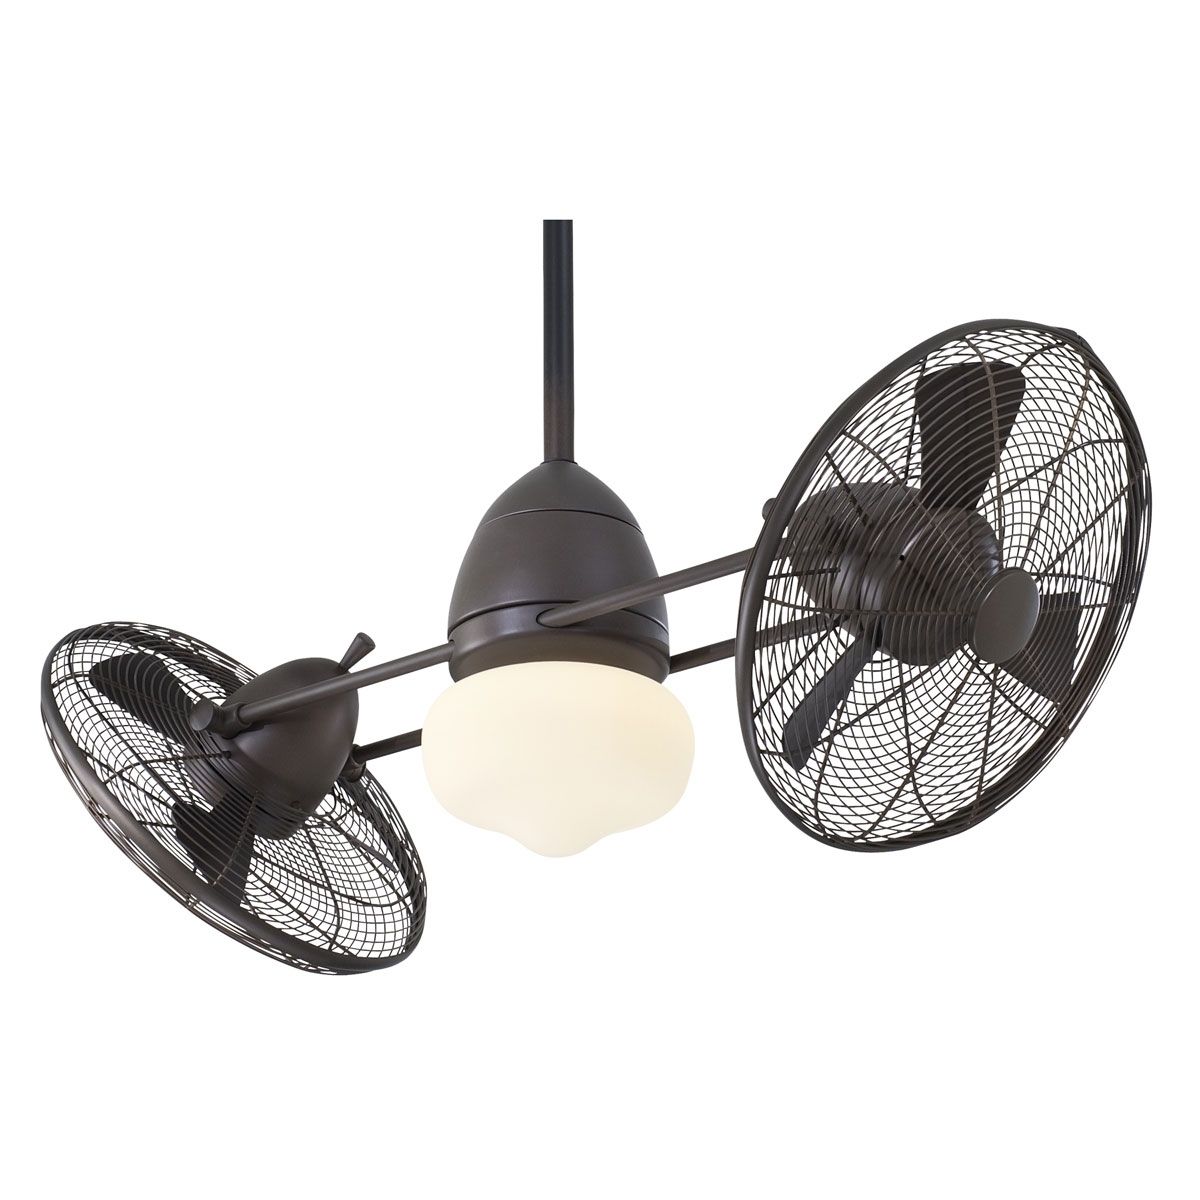 Best And Newest Vertical Outdoor Ceiling Fans Regarding Ceiling: Interesting Vertical Ceiling Fans Ceiling Fan Vertical (View 1 of 20)